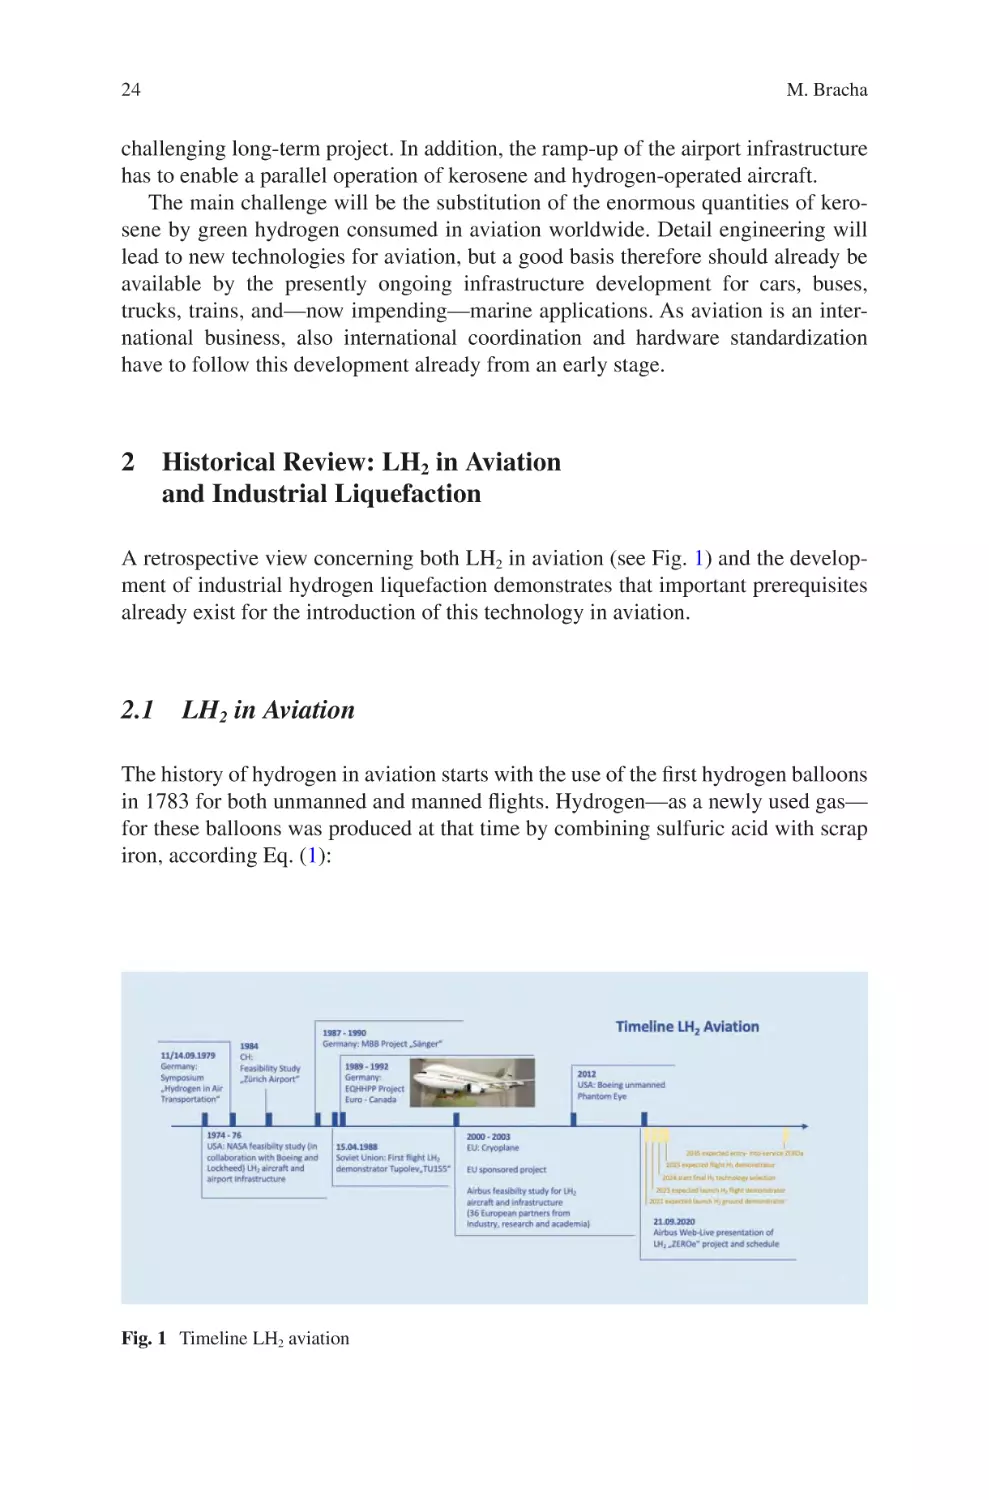 2 Historical Review
2.1 LH2 in Aviation